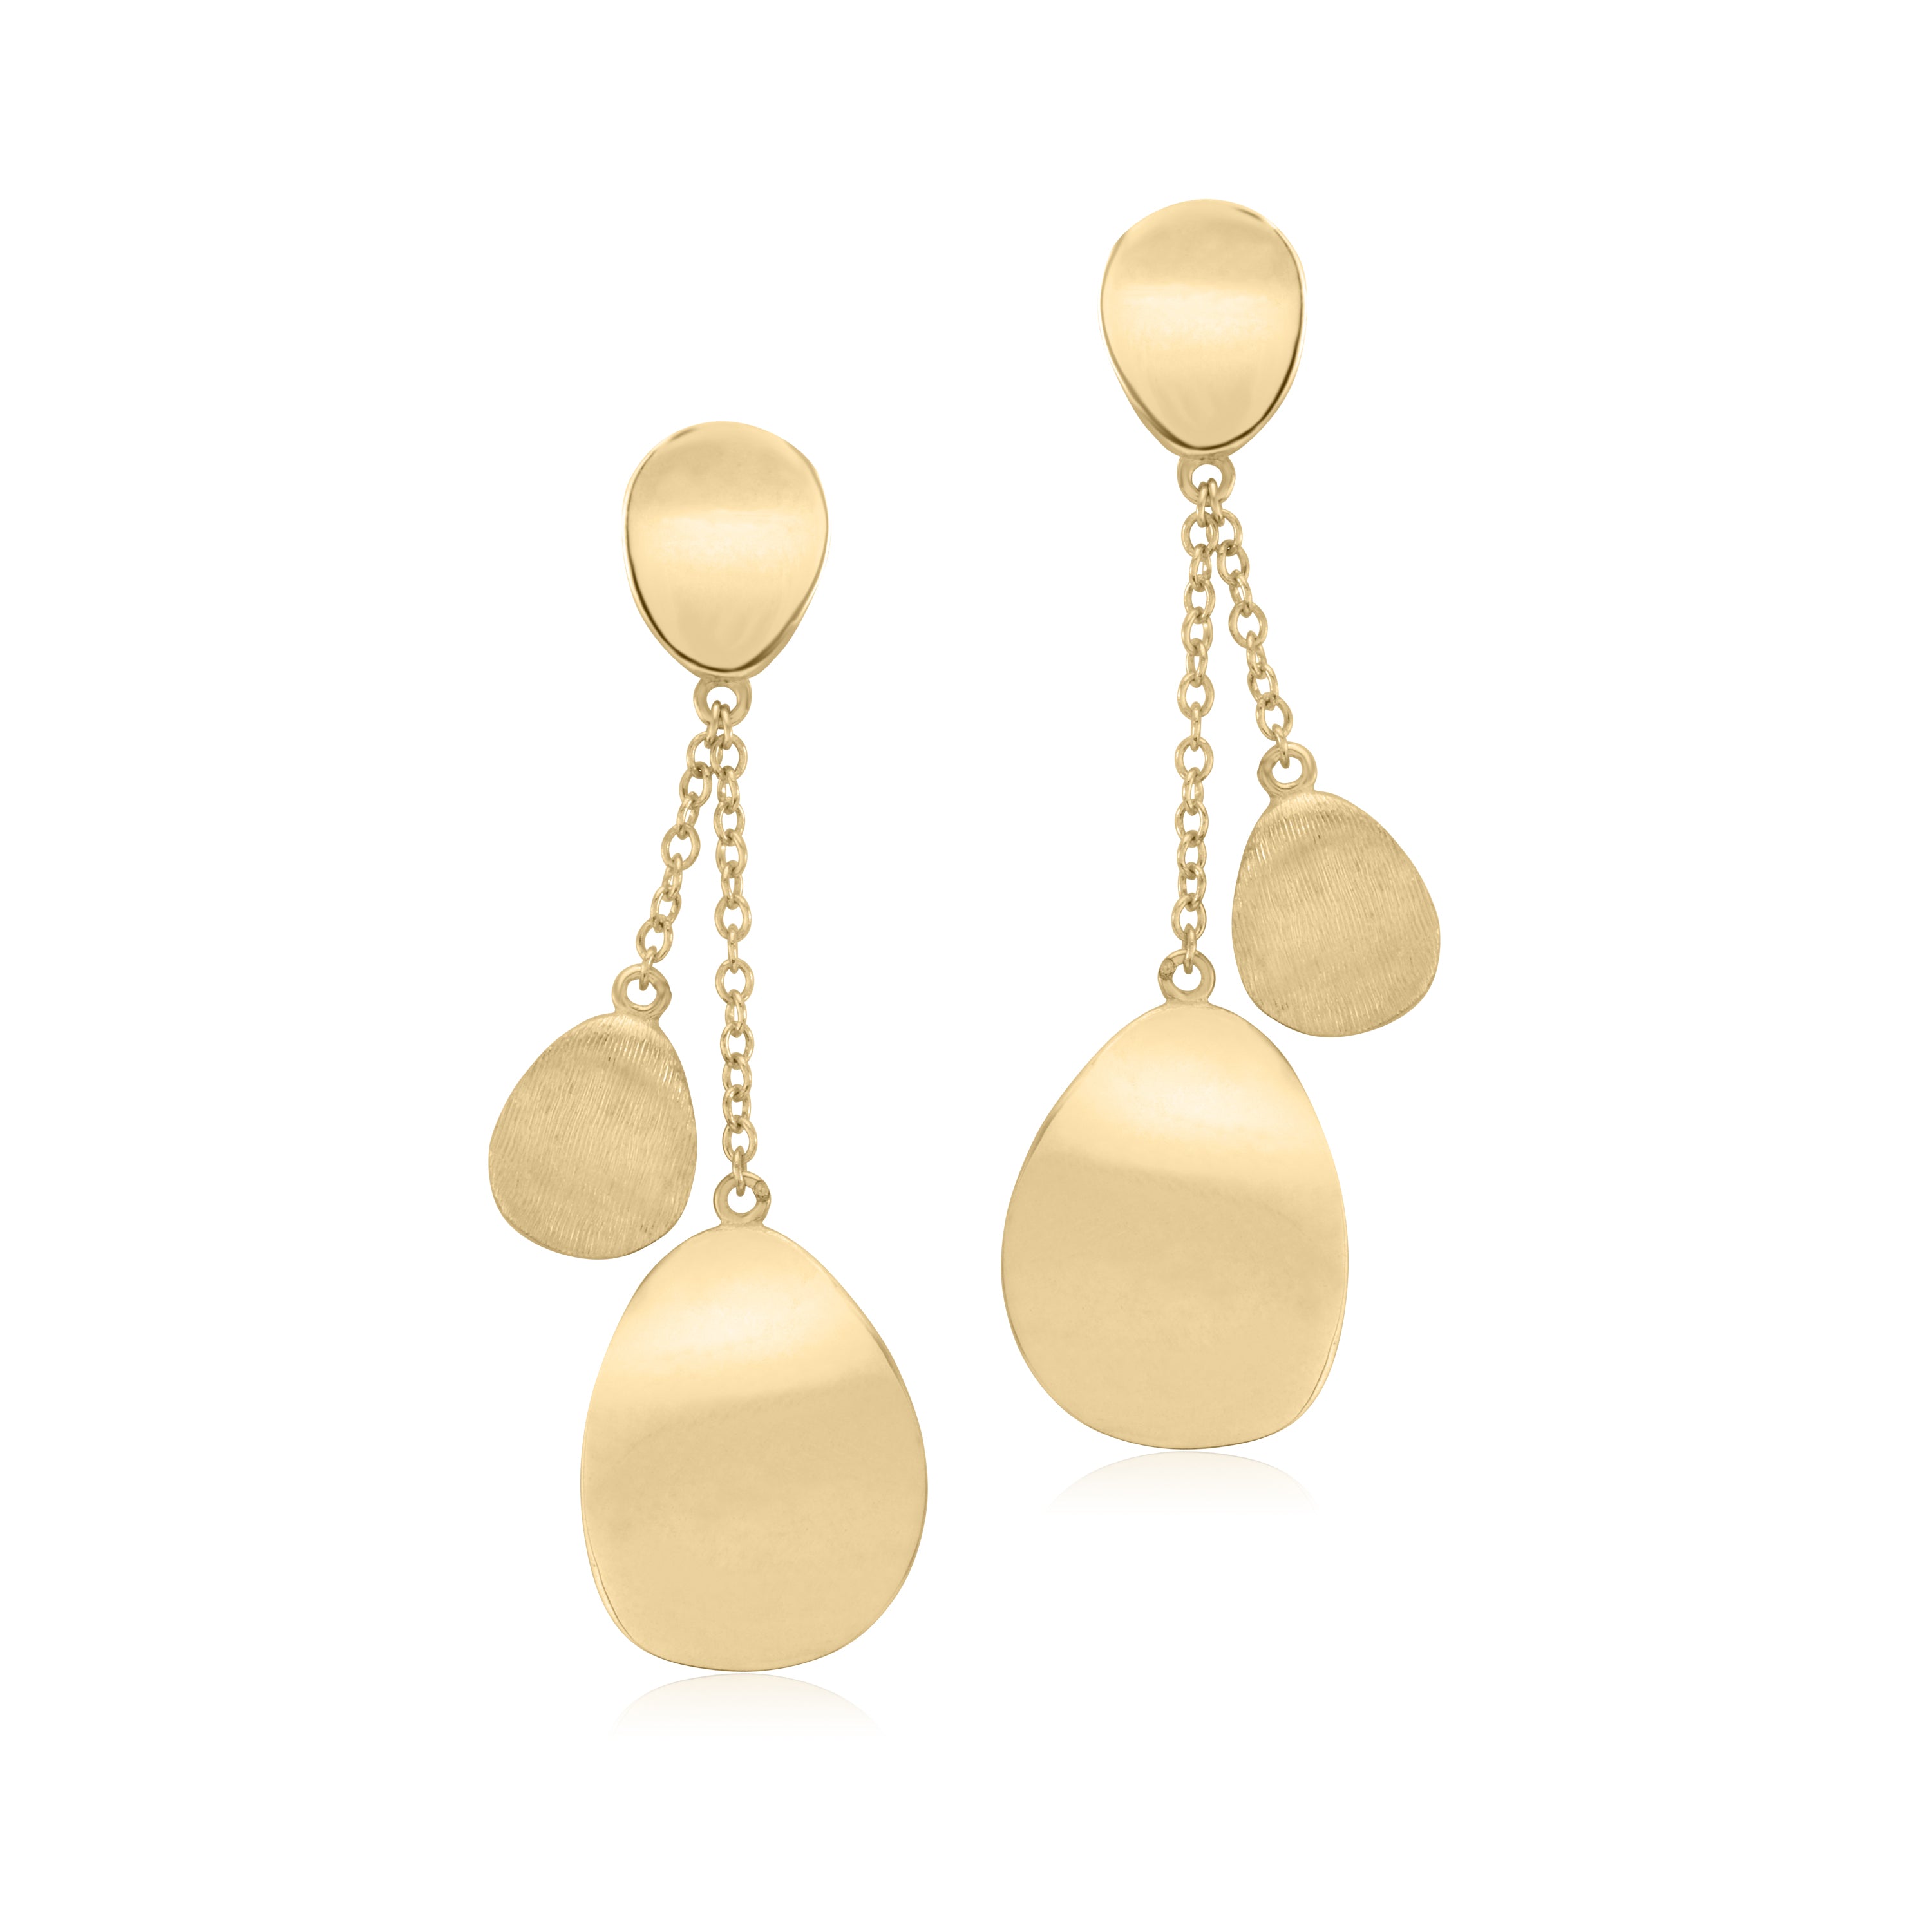 UNICORNJ 14K Yellow Gold Polished and Brushed Long Double Dangle Drop Curved Teardrop Earrings Italy